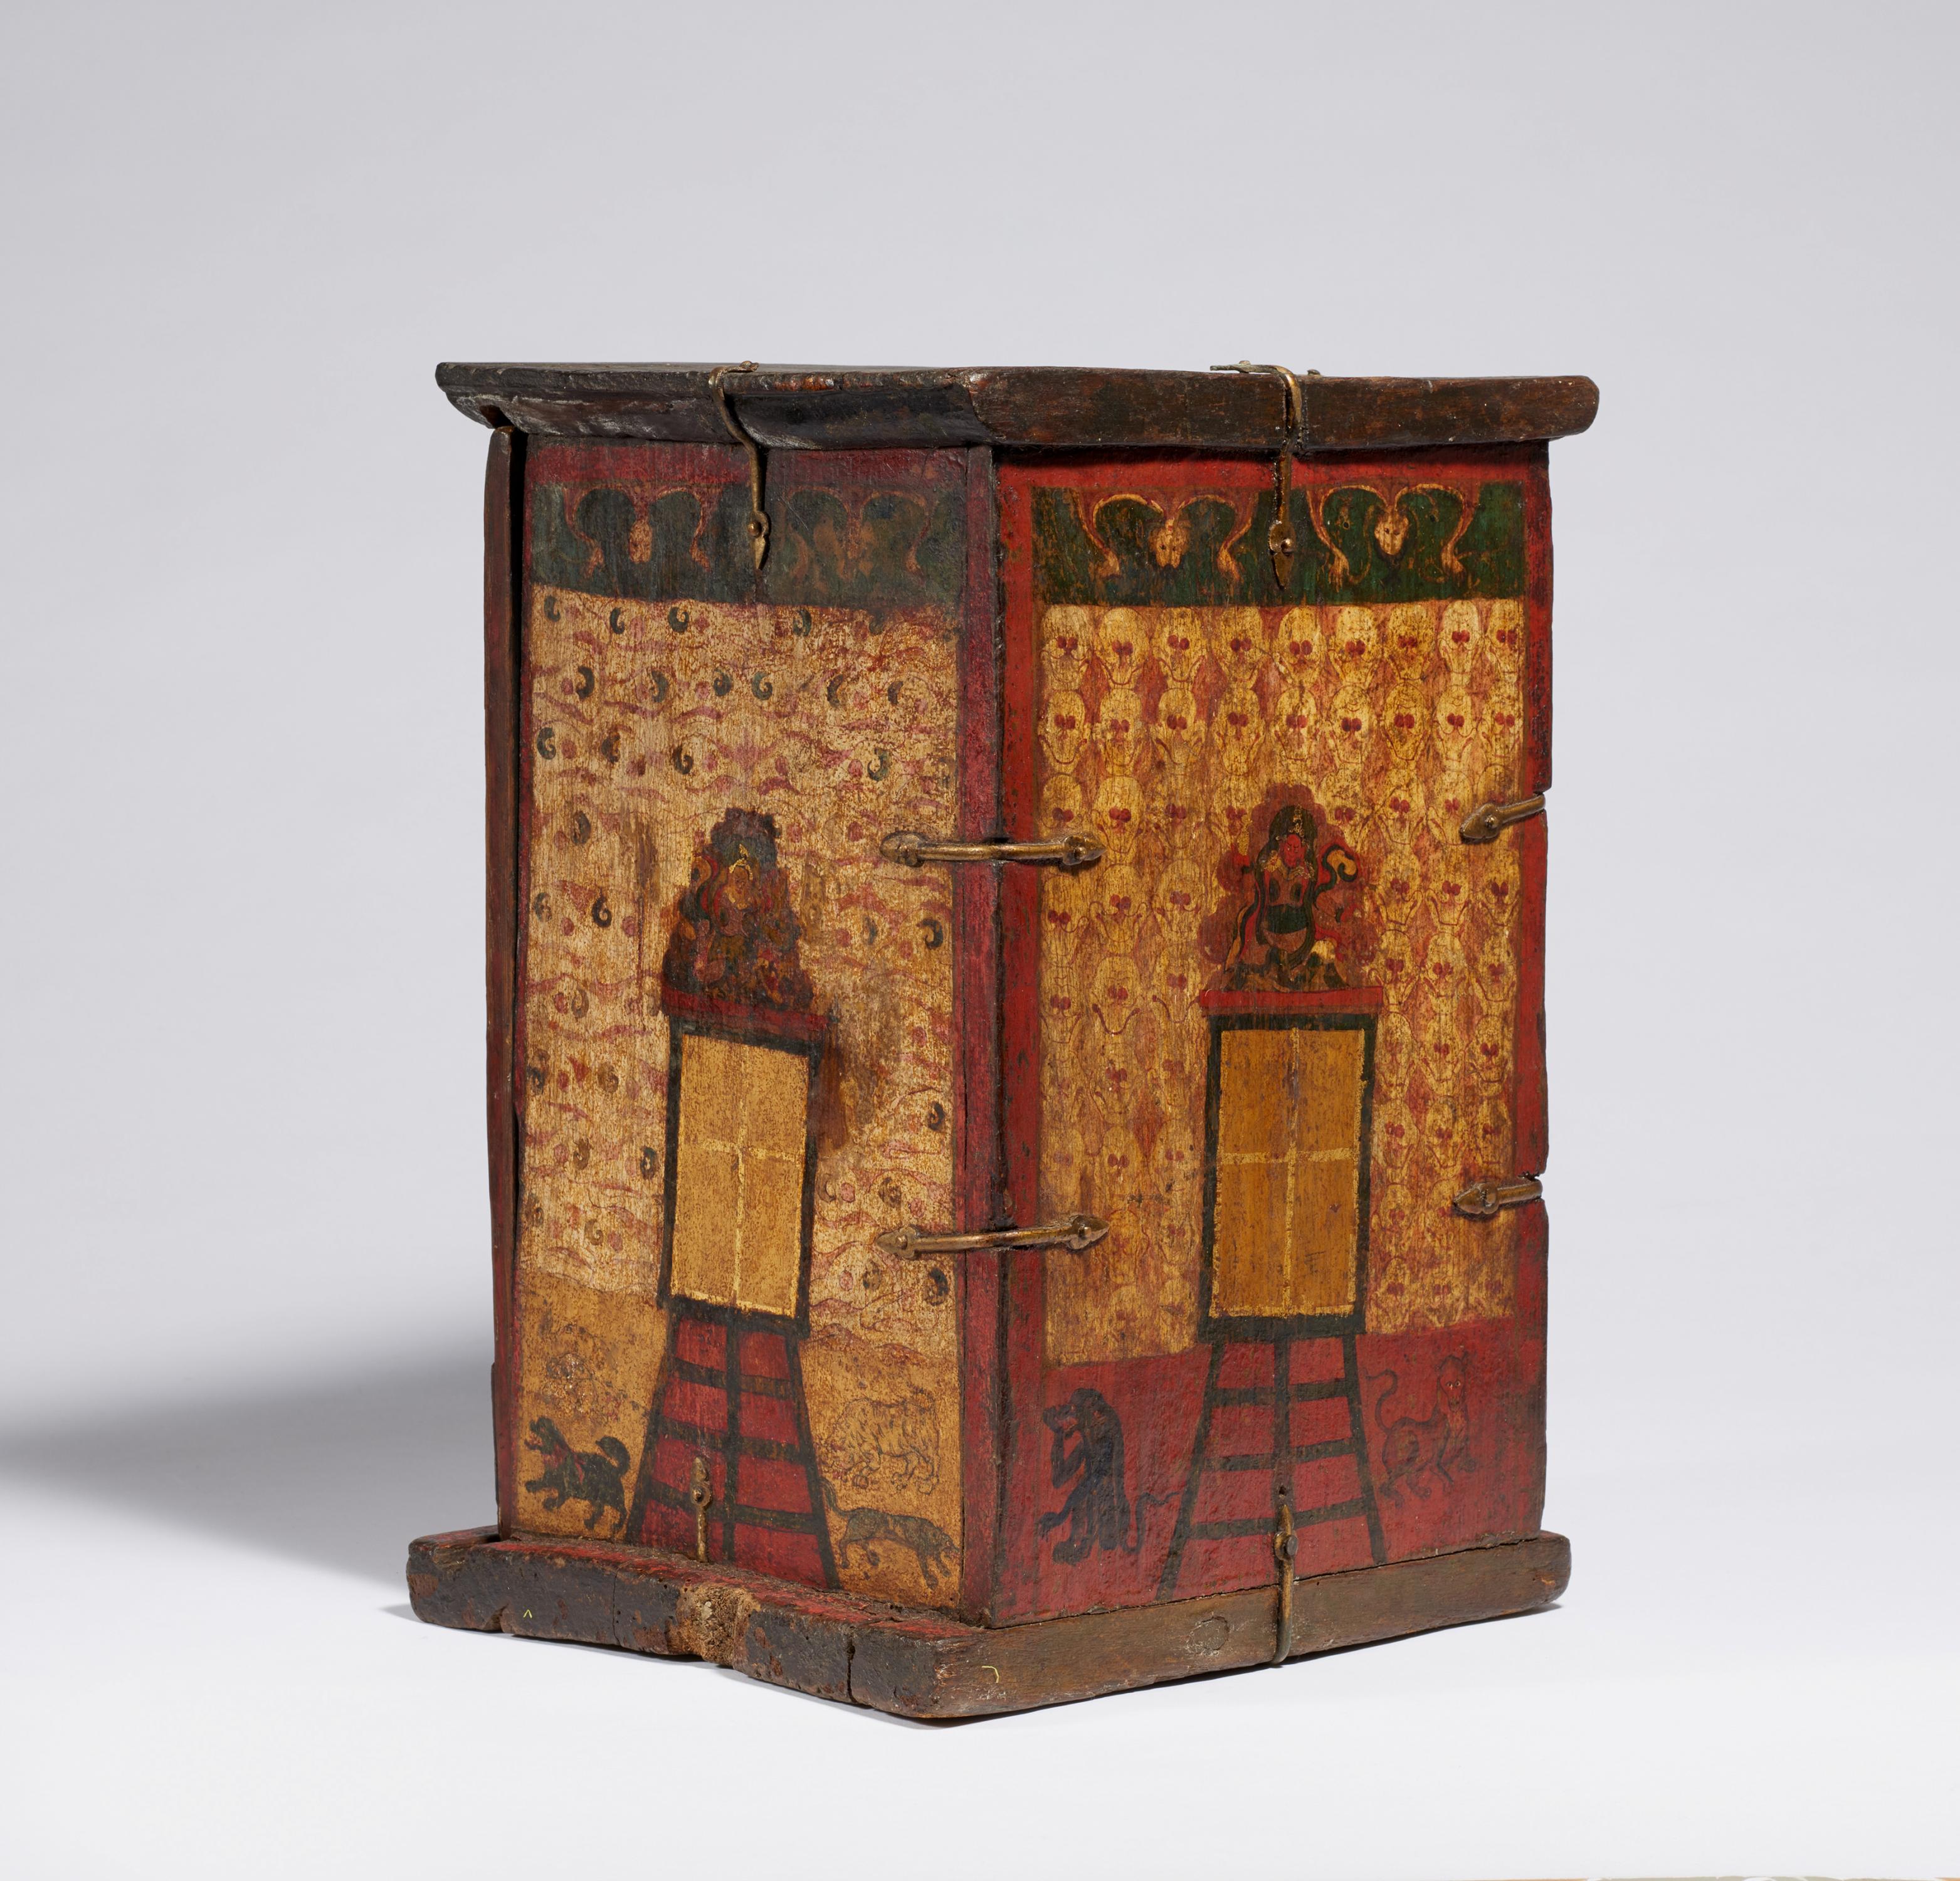 VERY RARE TANTRIC STORAGE CONTAINER - TORMA KANG. Origin: Tibet. Date: 17th/18th c. Technique: - Image 2 of 12